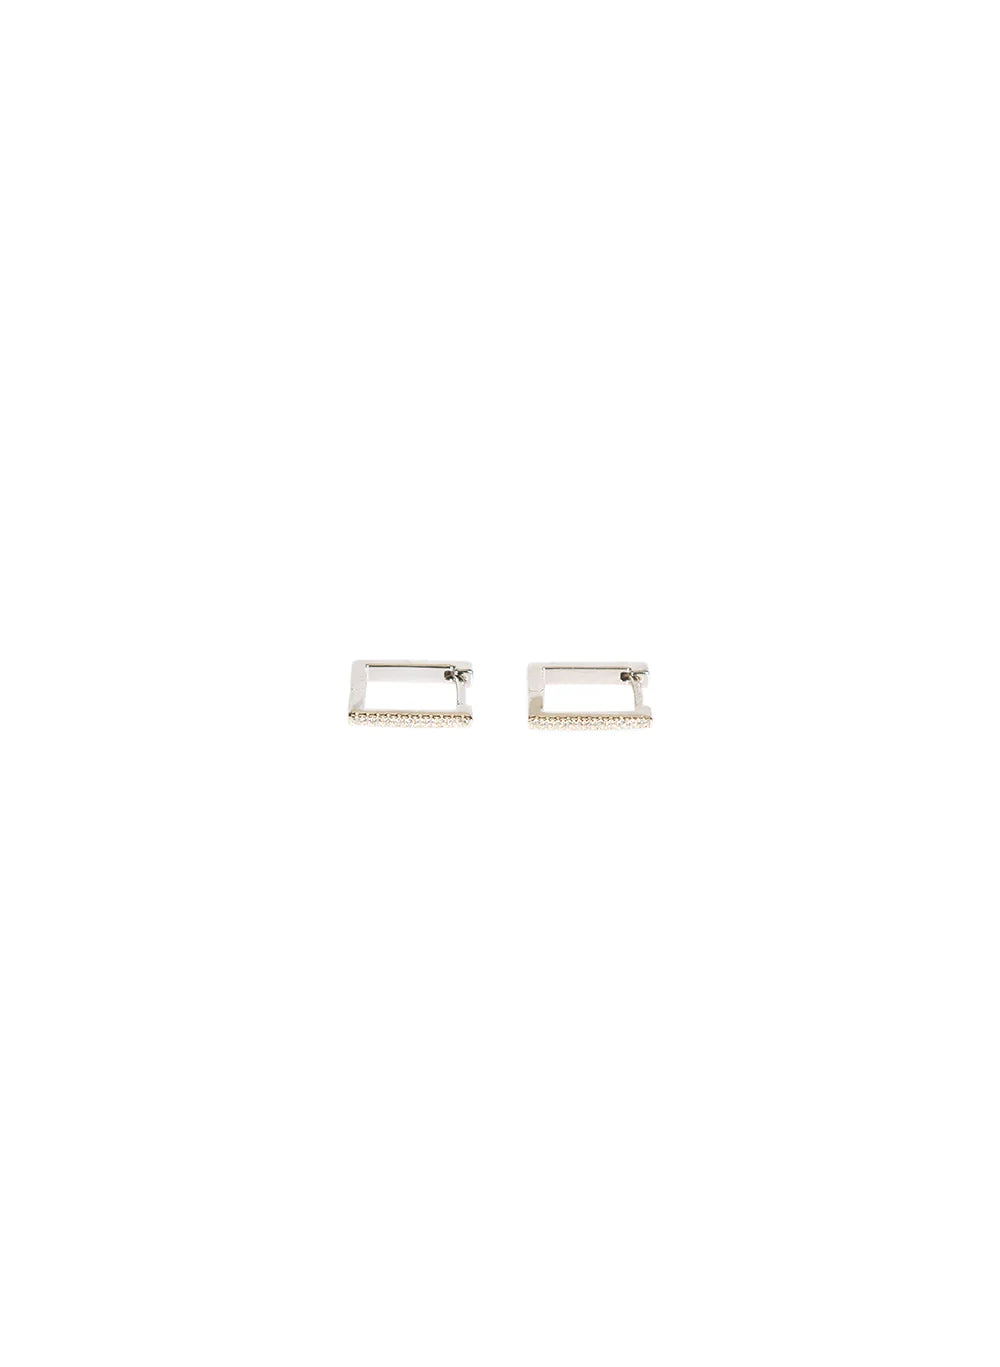 Federation Squared Earrings